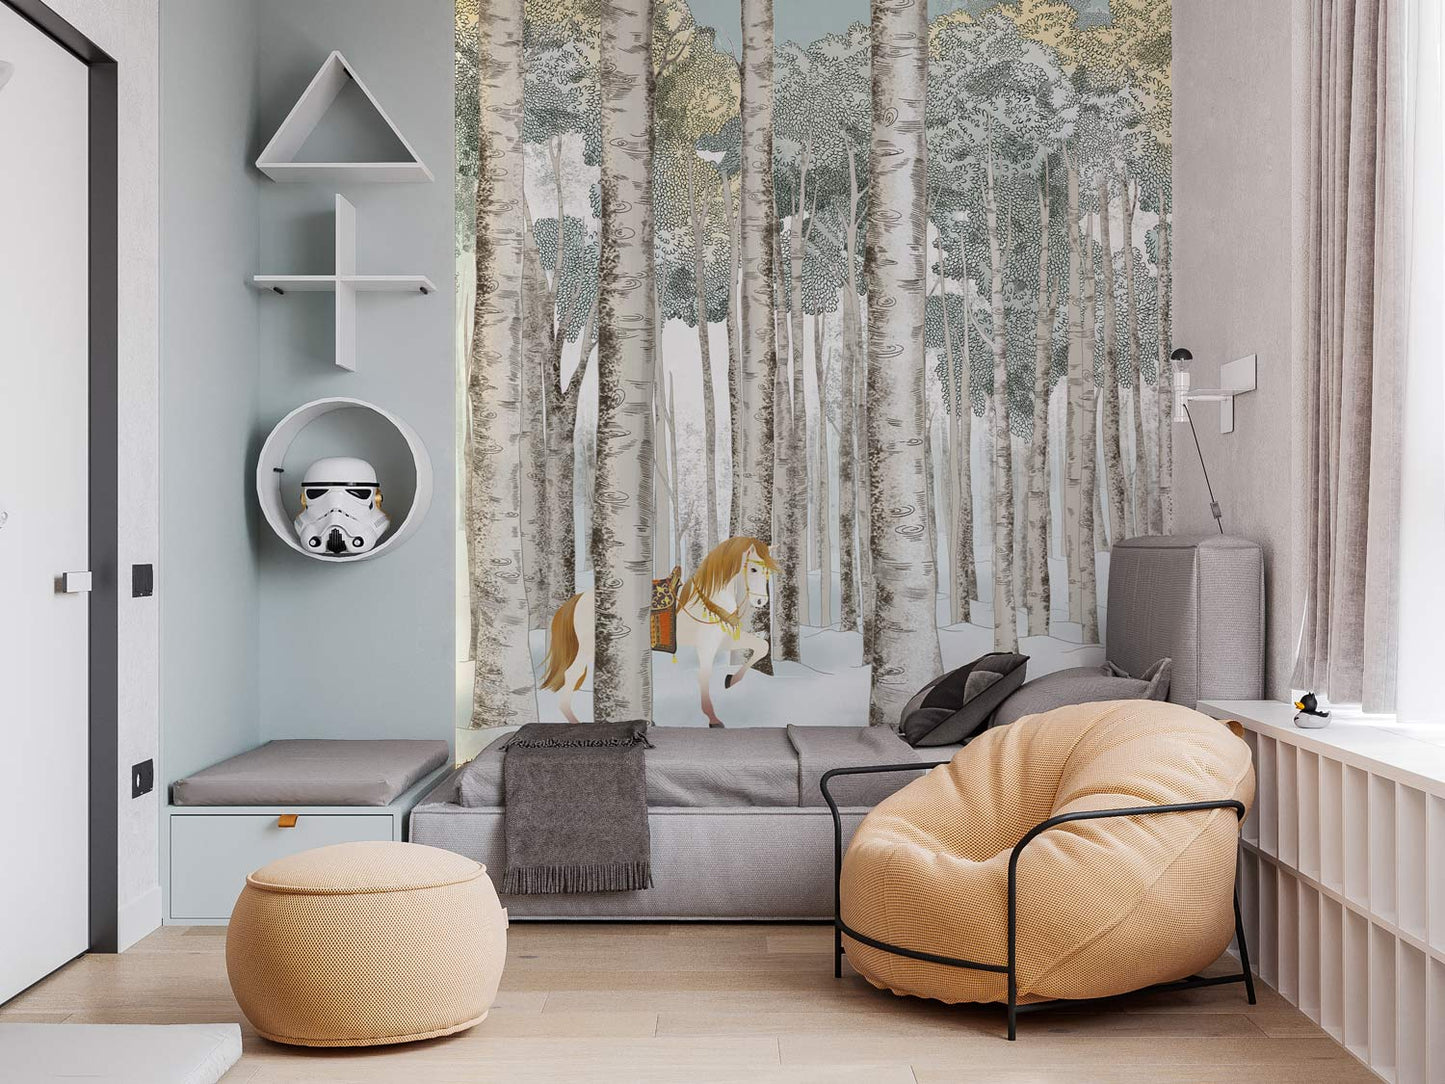 Wallpaper mural with a horse in the woods, perfect for use as bedroom decor.